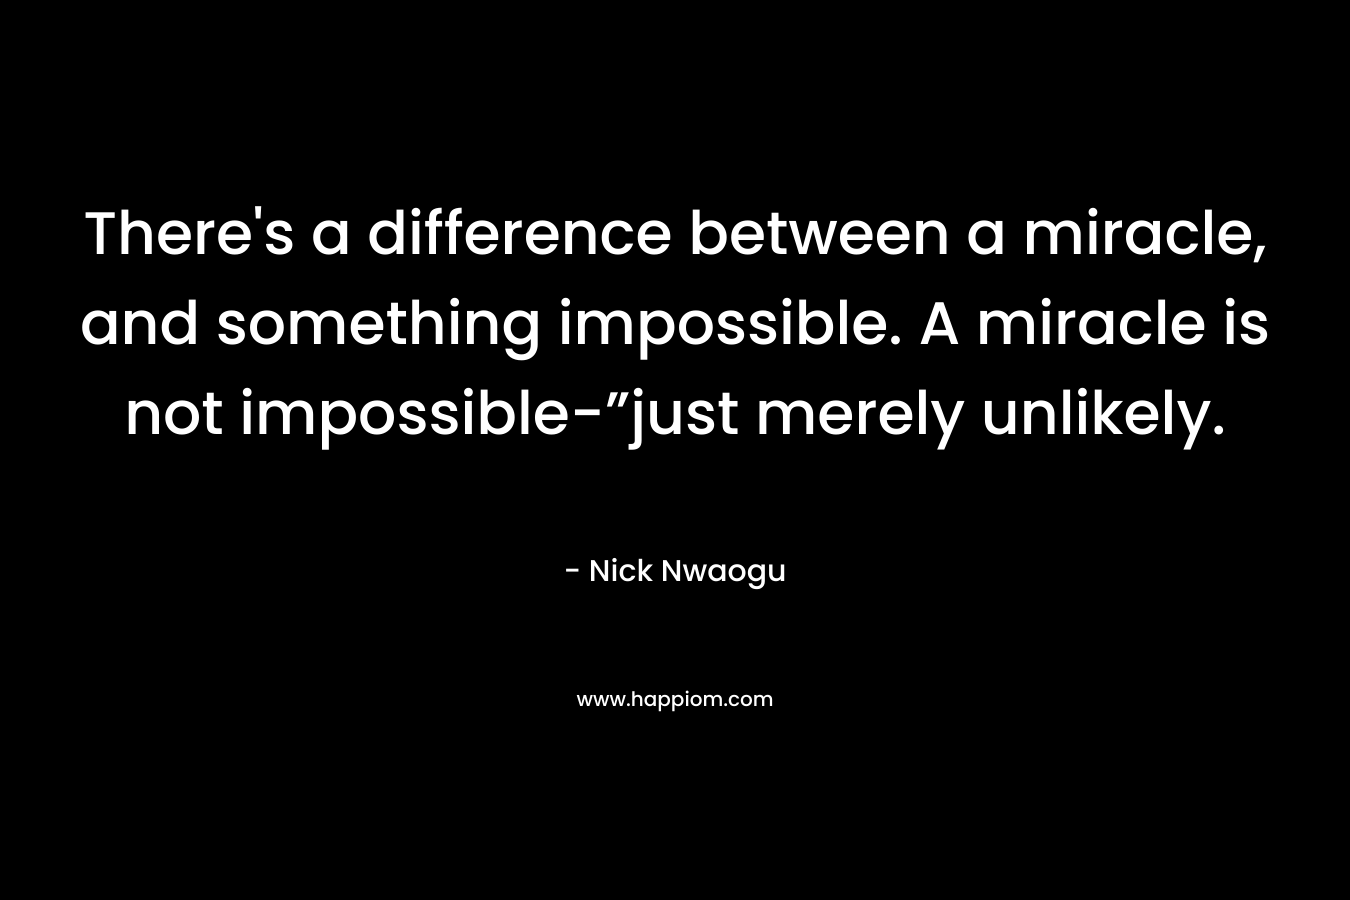 There's a difference between a miracle, and something impossible. A miracle is not impossible-”just merely unlikely.